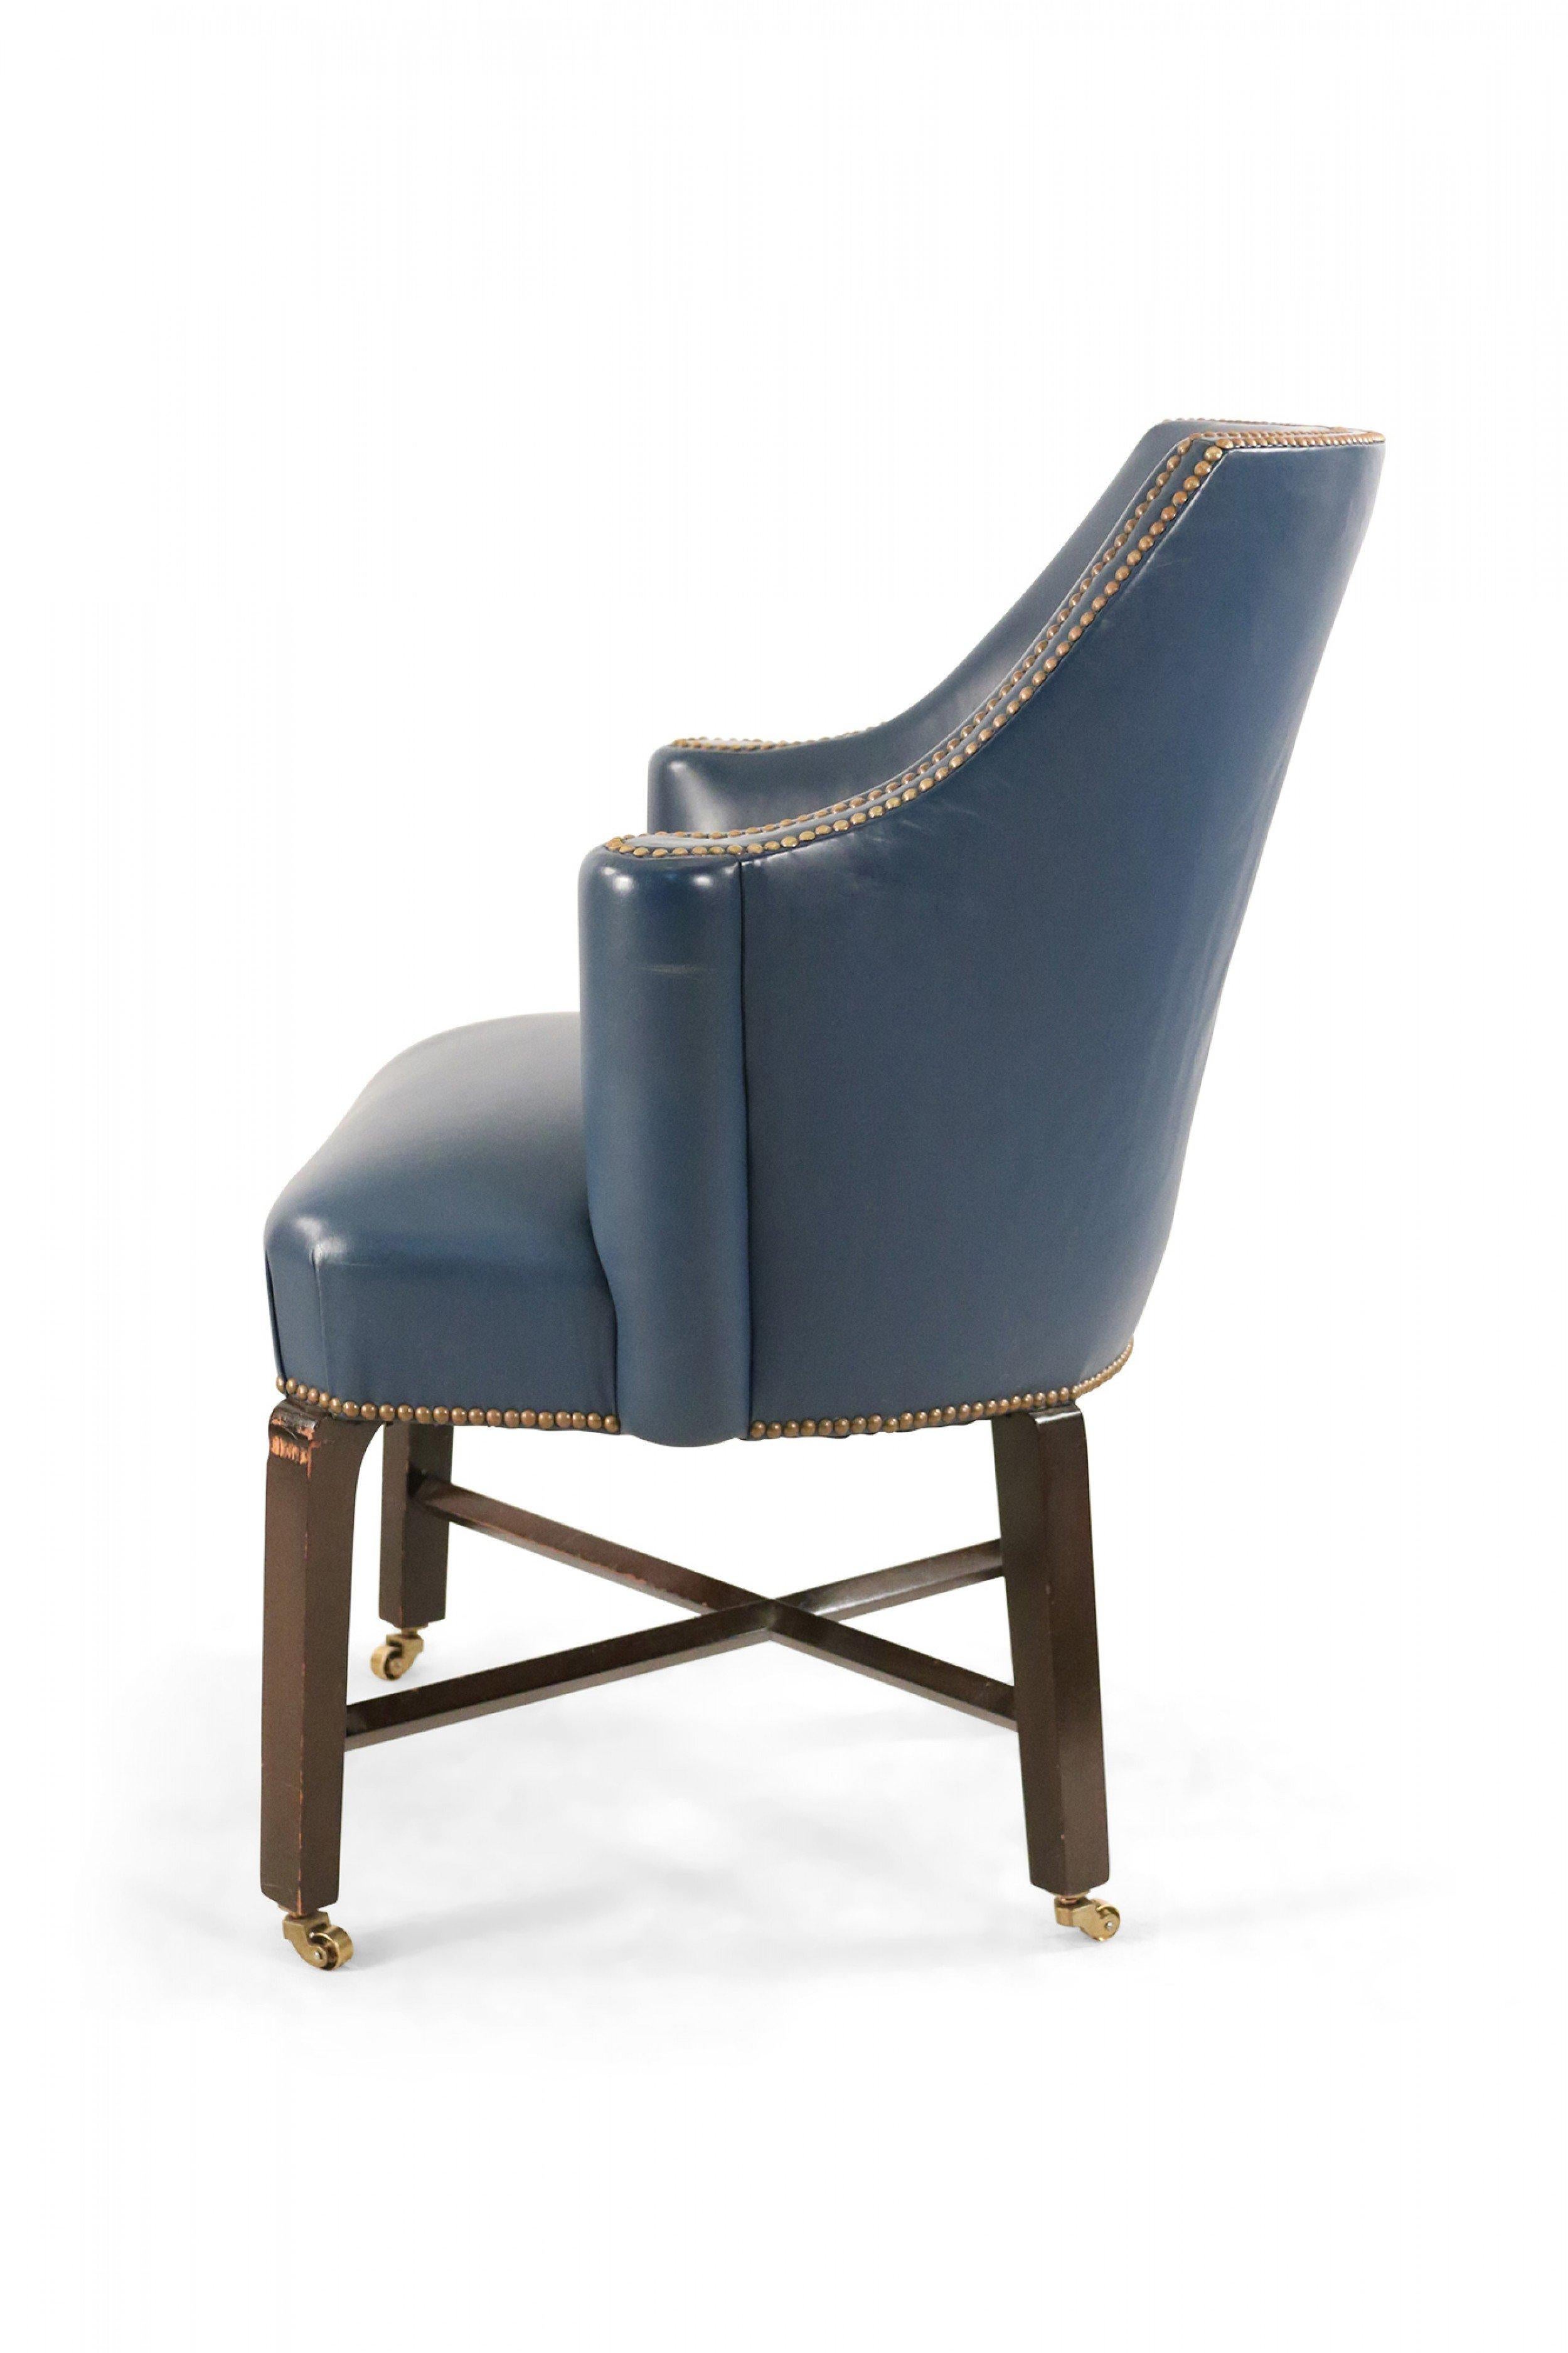 American Contemporary Blue Leather Rounded Back Club / Armchair For Sale